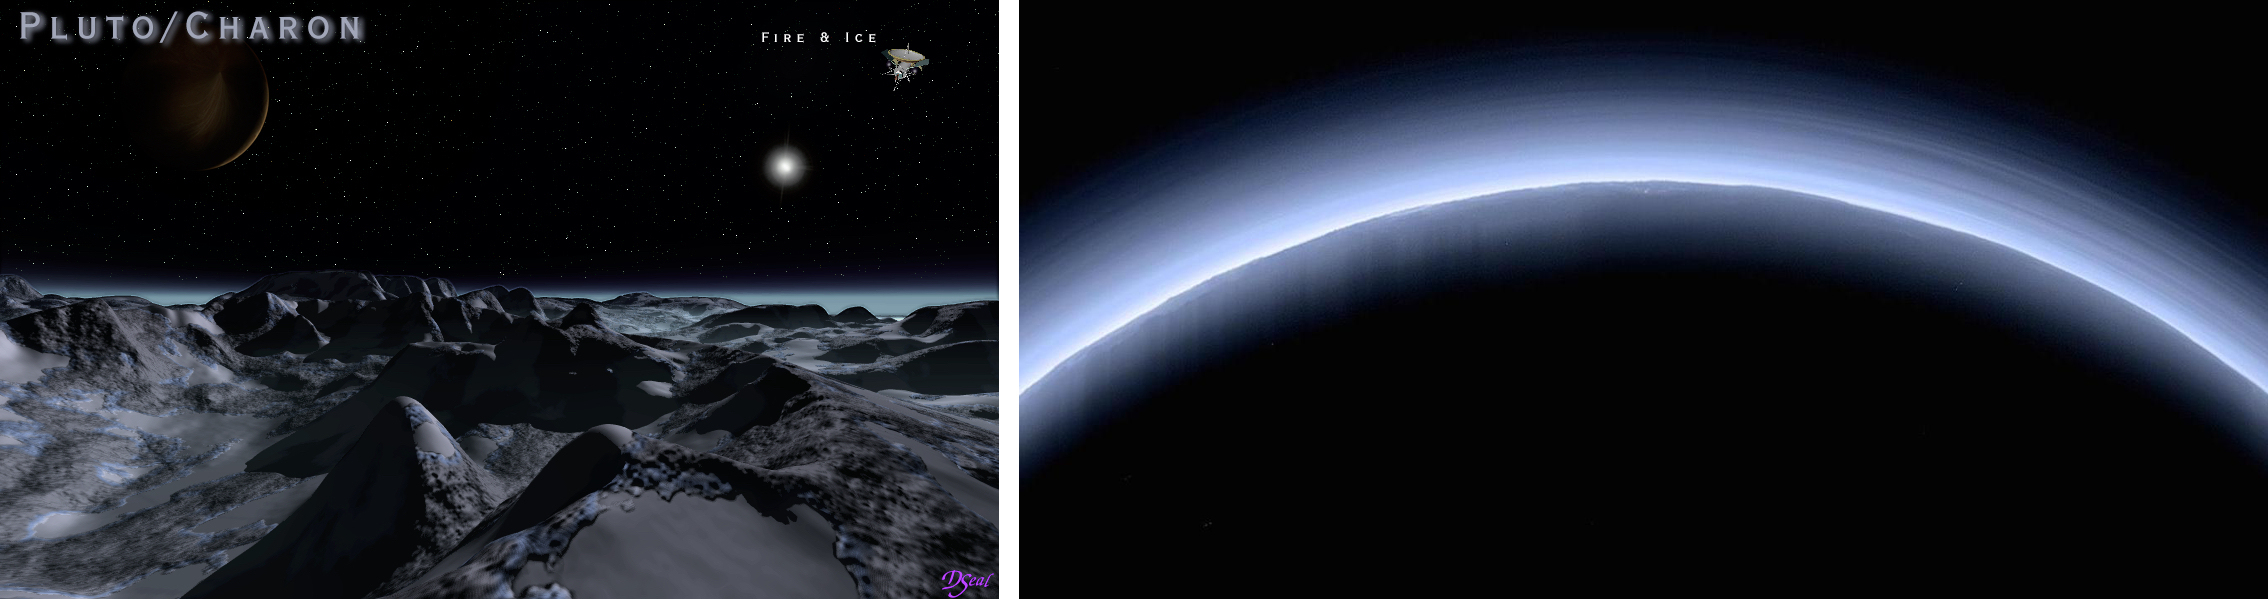 pluto side by side